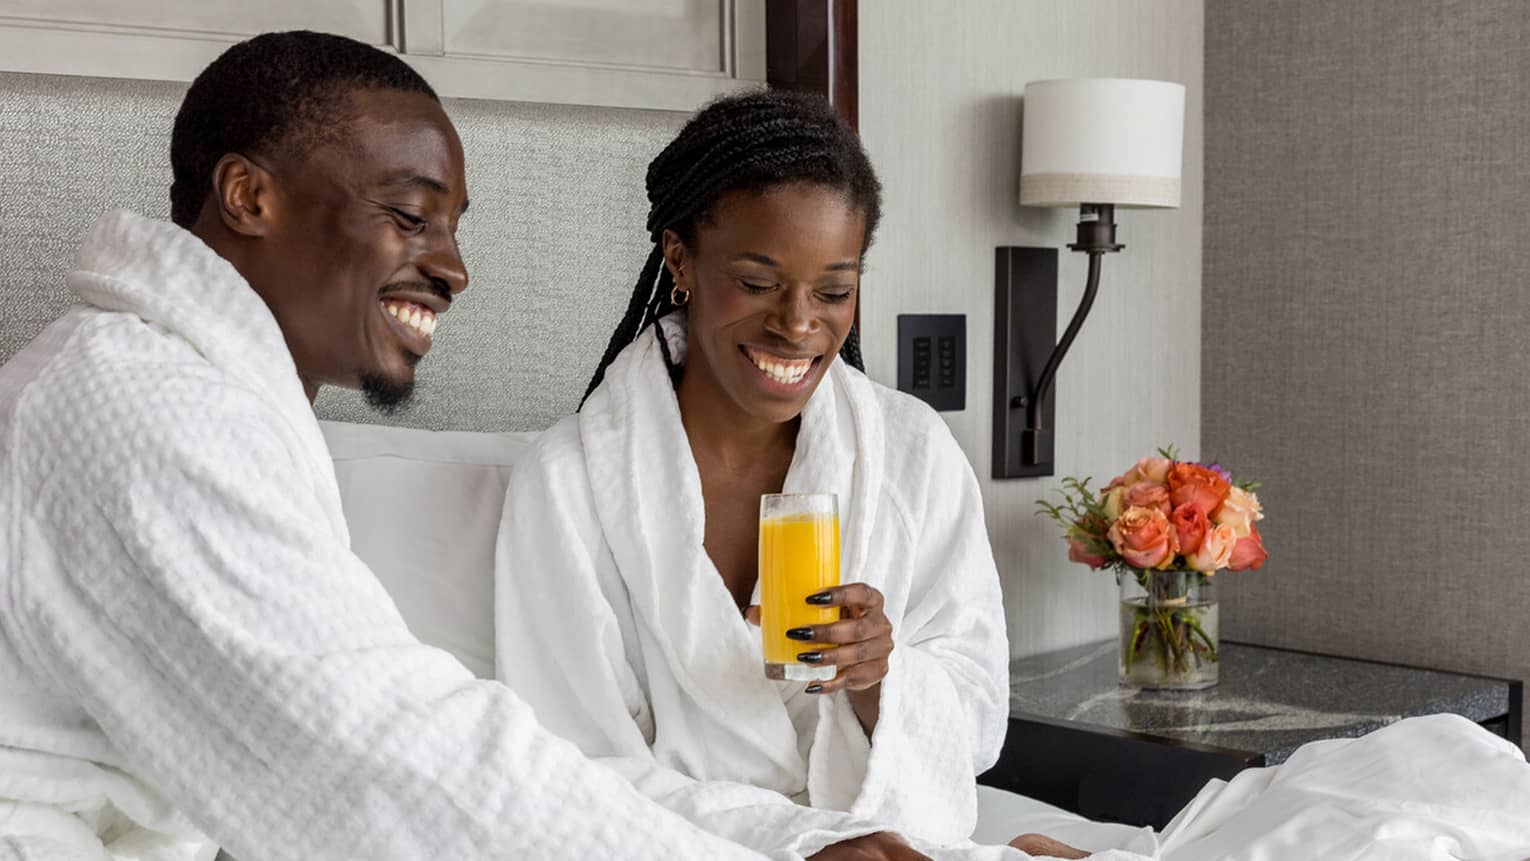 ,A couple dressed in white bath robes enjoys breakfast in bed